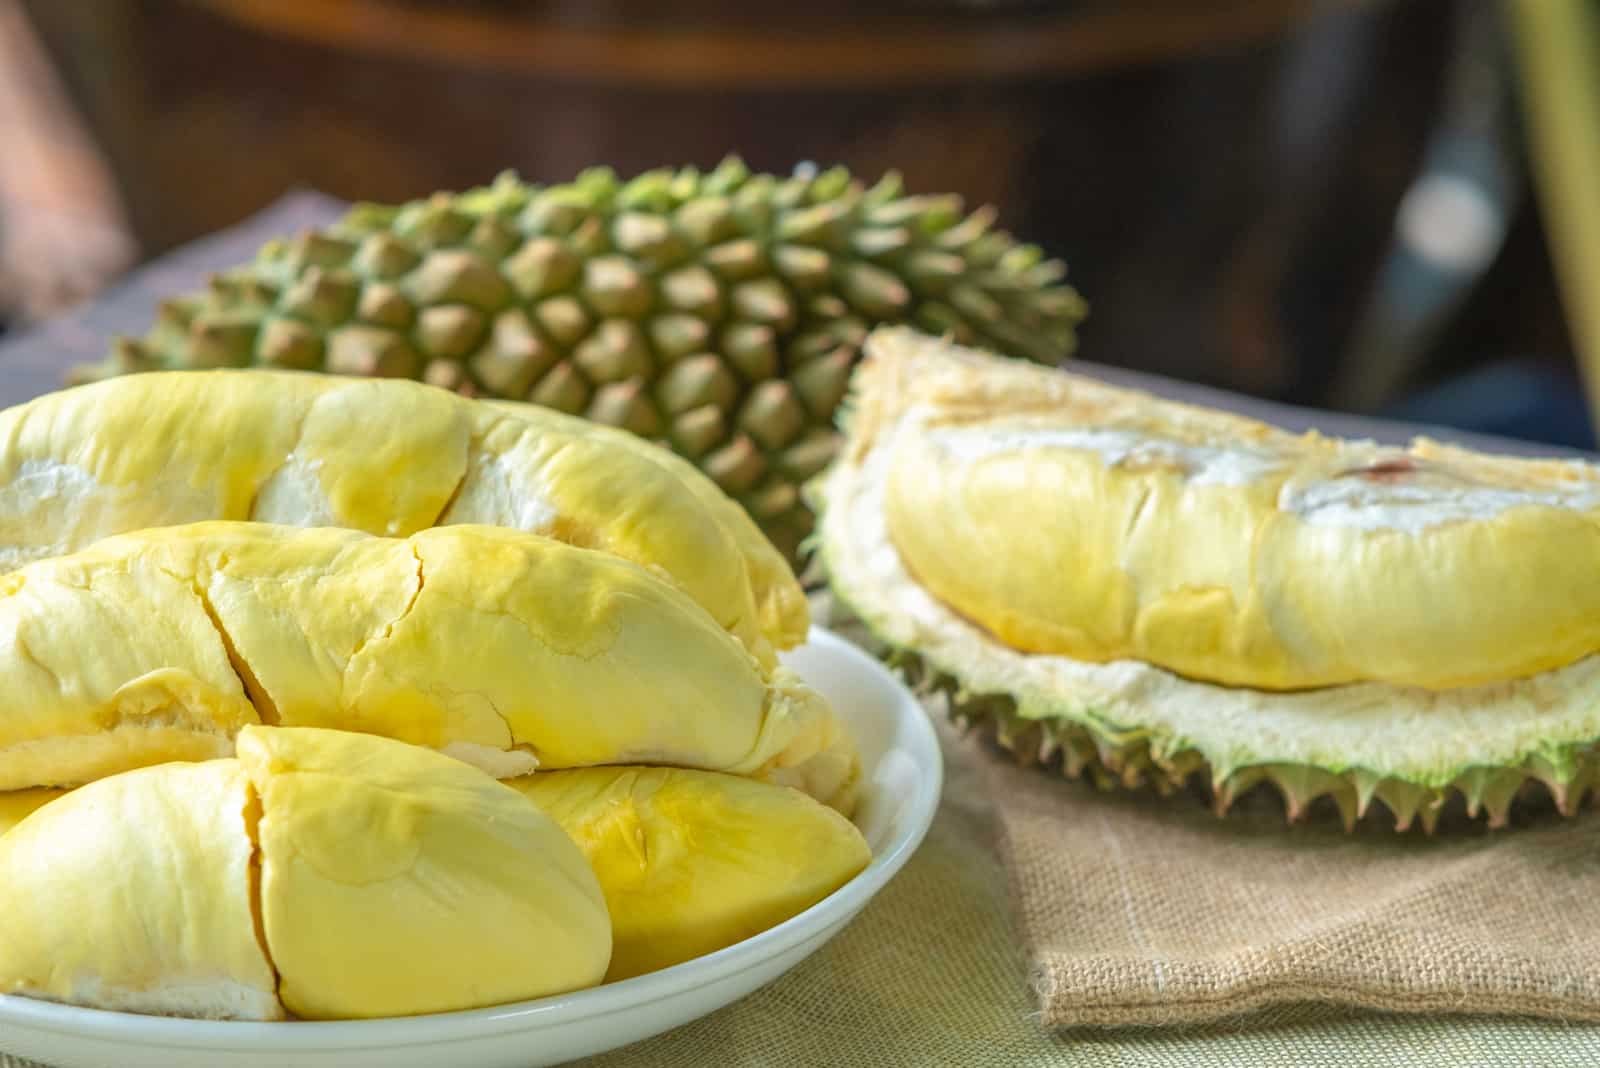 durian on white plate and peeling durian on sack bag